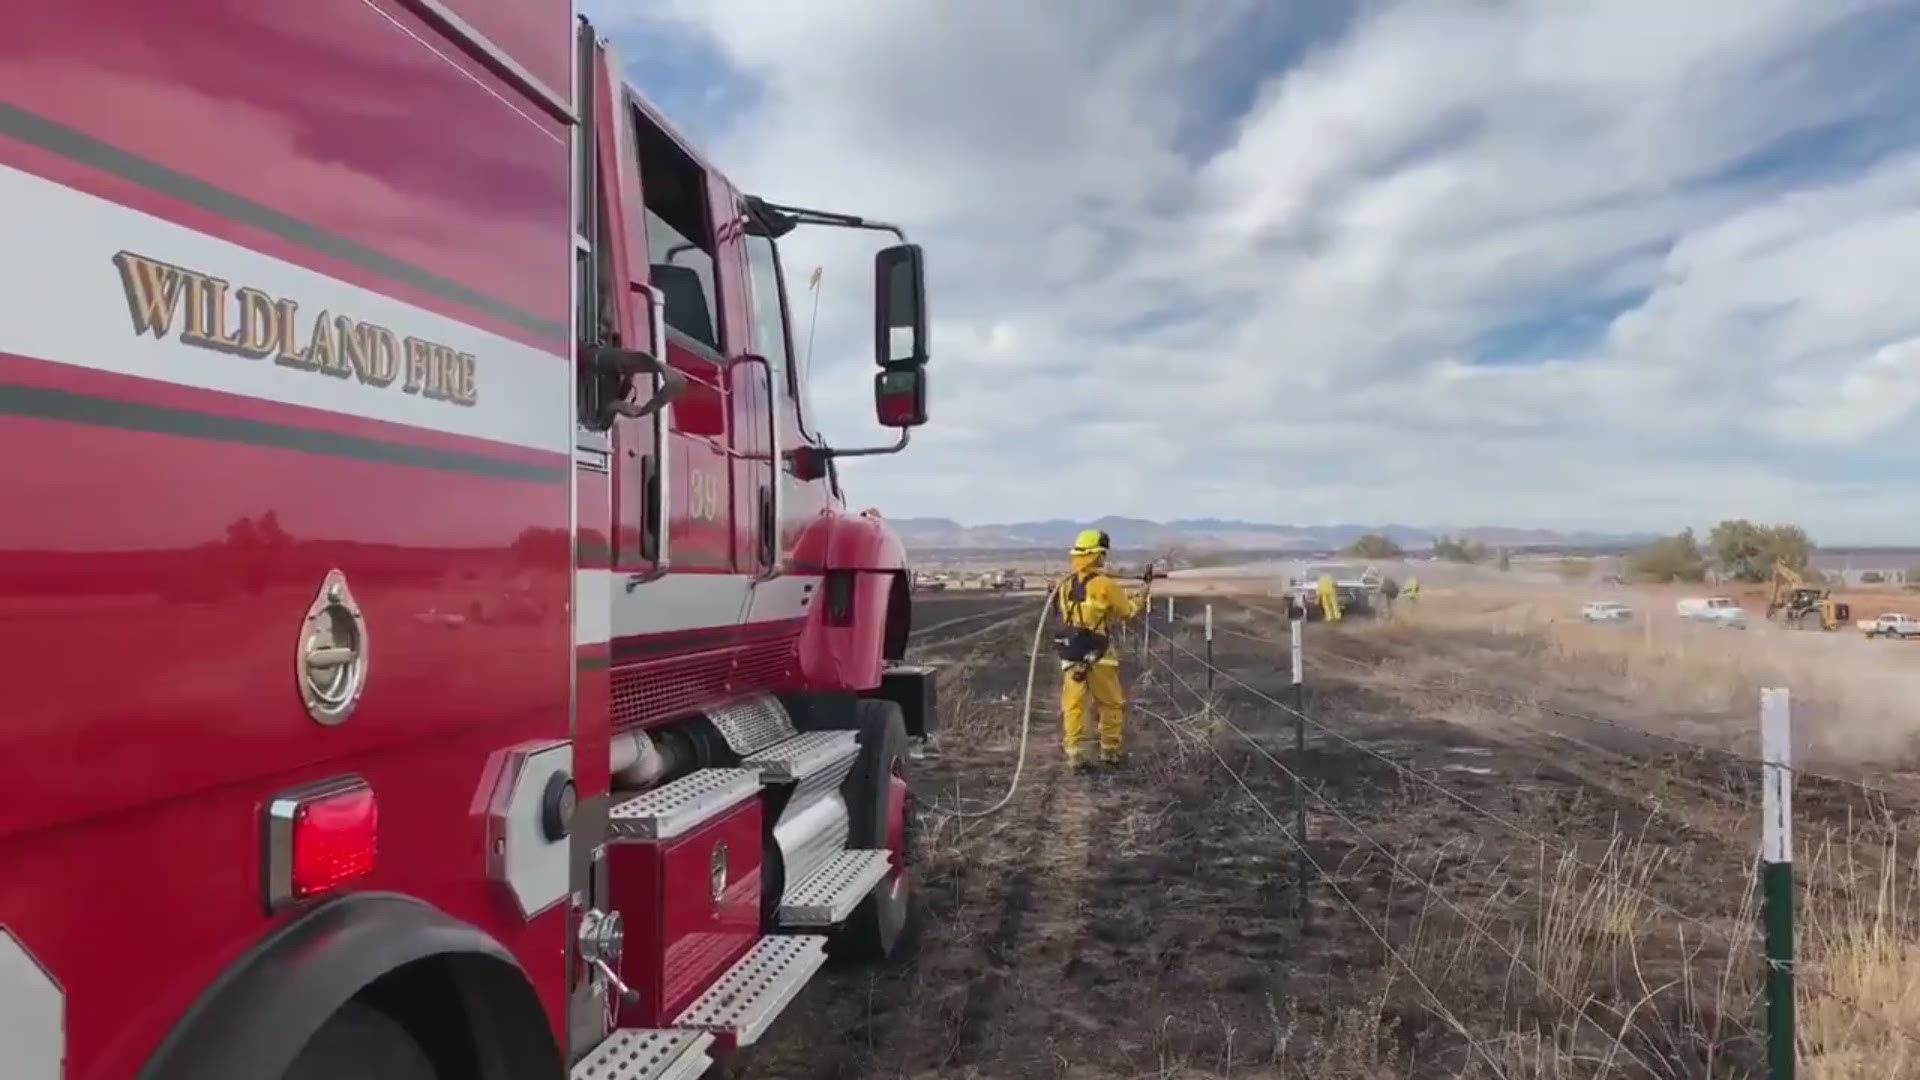 About 5 acres of grass was burned just south of Chatfield State Park. South Metro Fire Rescue said no one was injured and no structures were threatened.